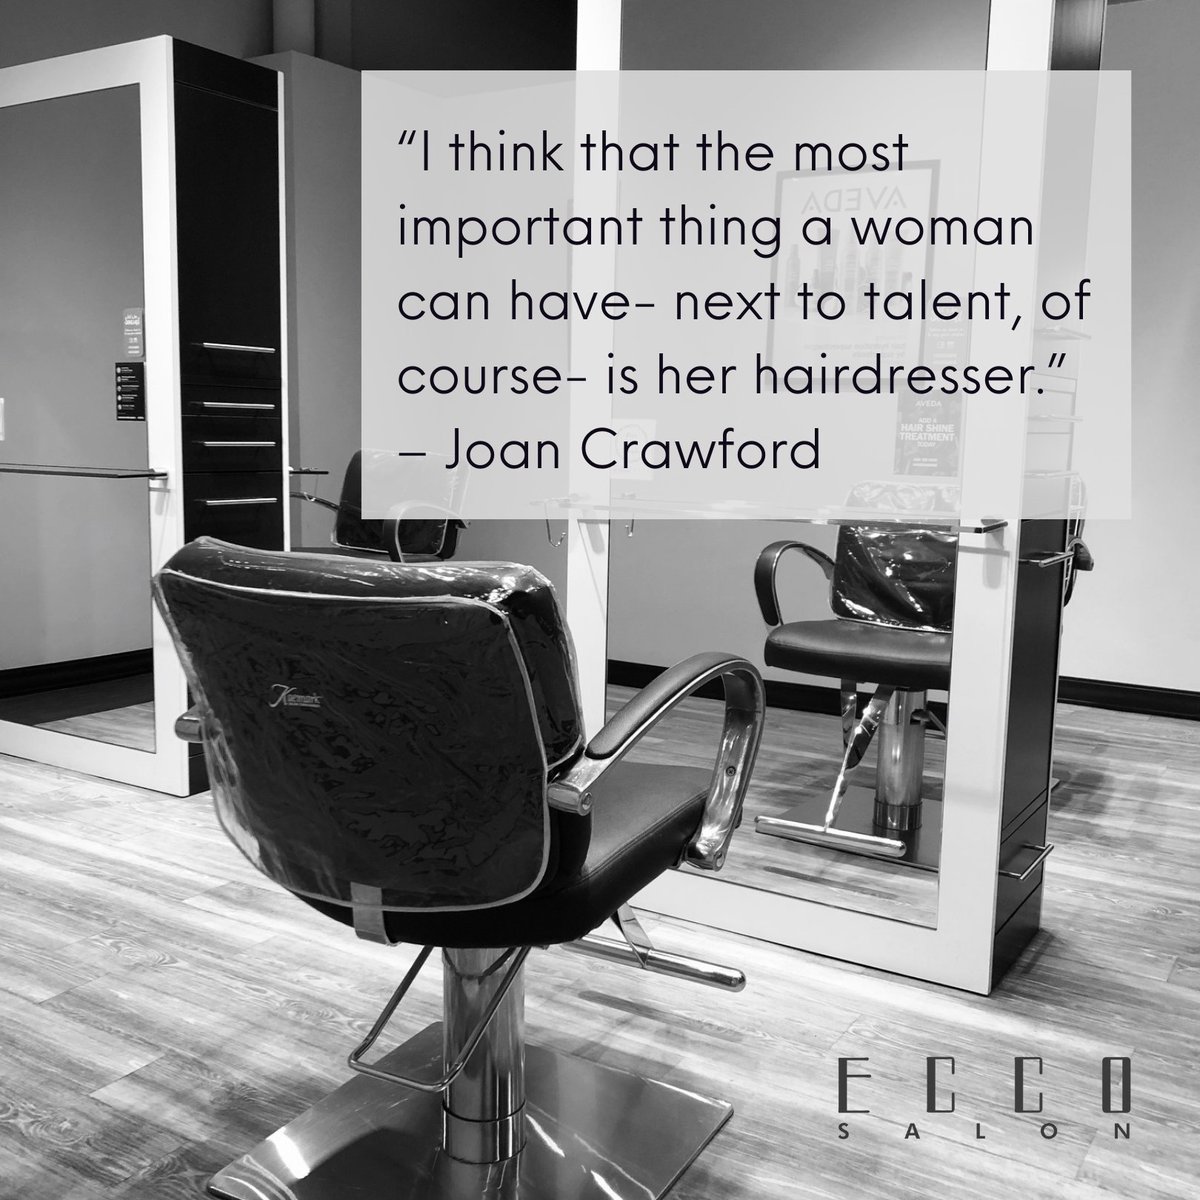 And the Oscar for best hair quote goes to... Joan Crawford 🏆 #eccosalon #aveda #eccostylist #eccohair #eccohairgoals #vegancolor #lovethathair #oscar #bestquote #hairquote